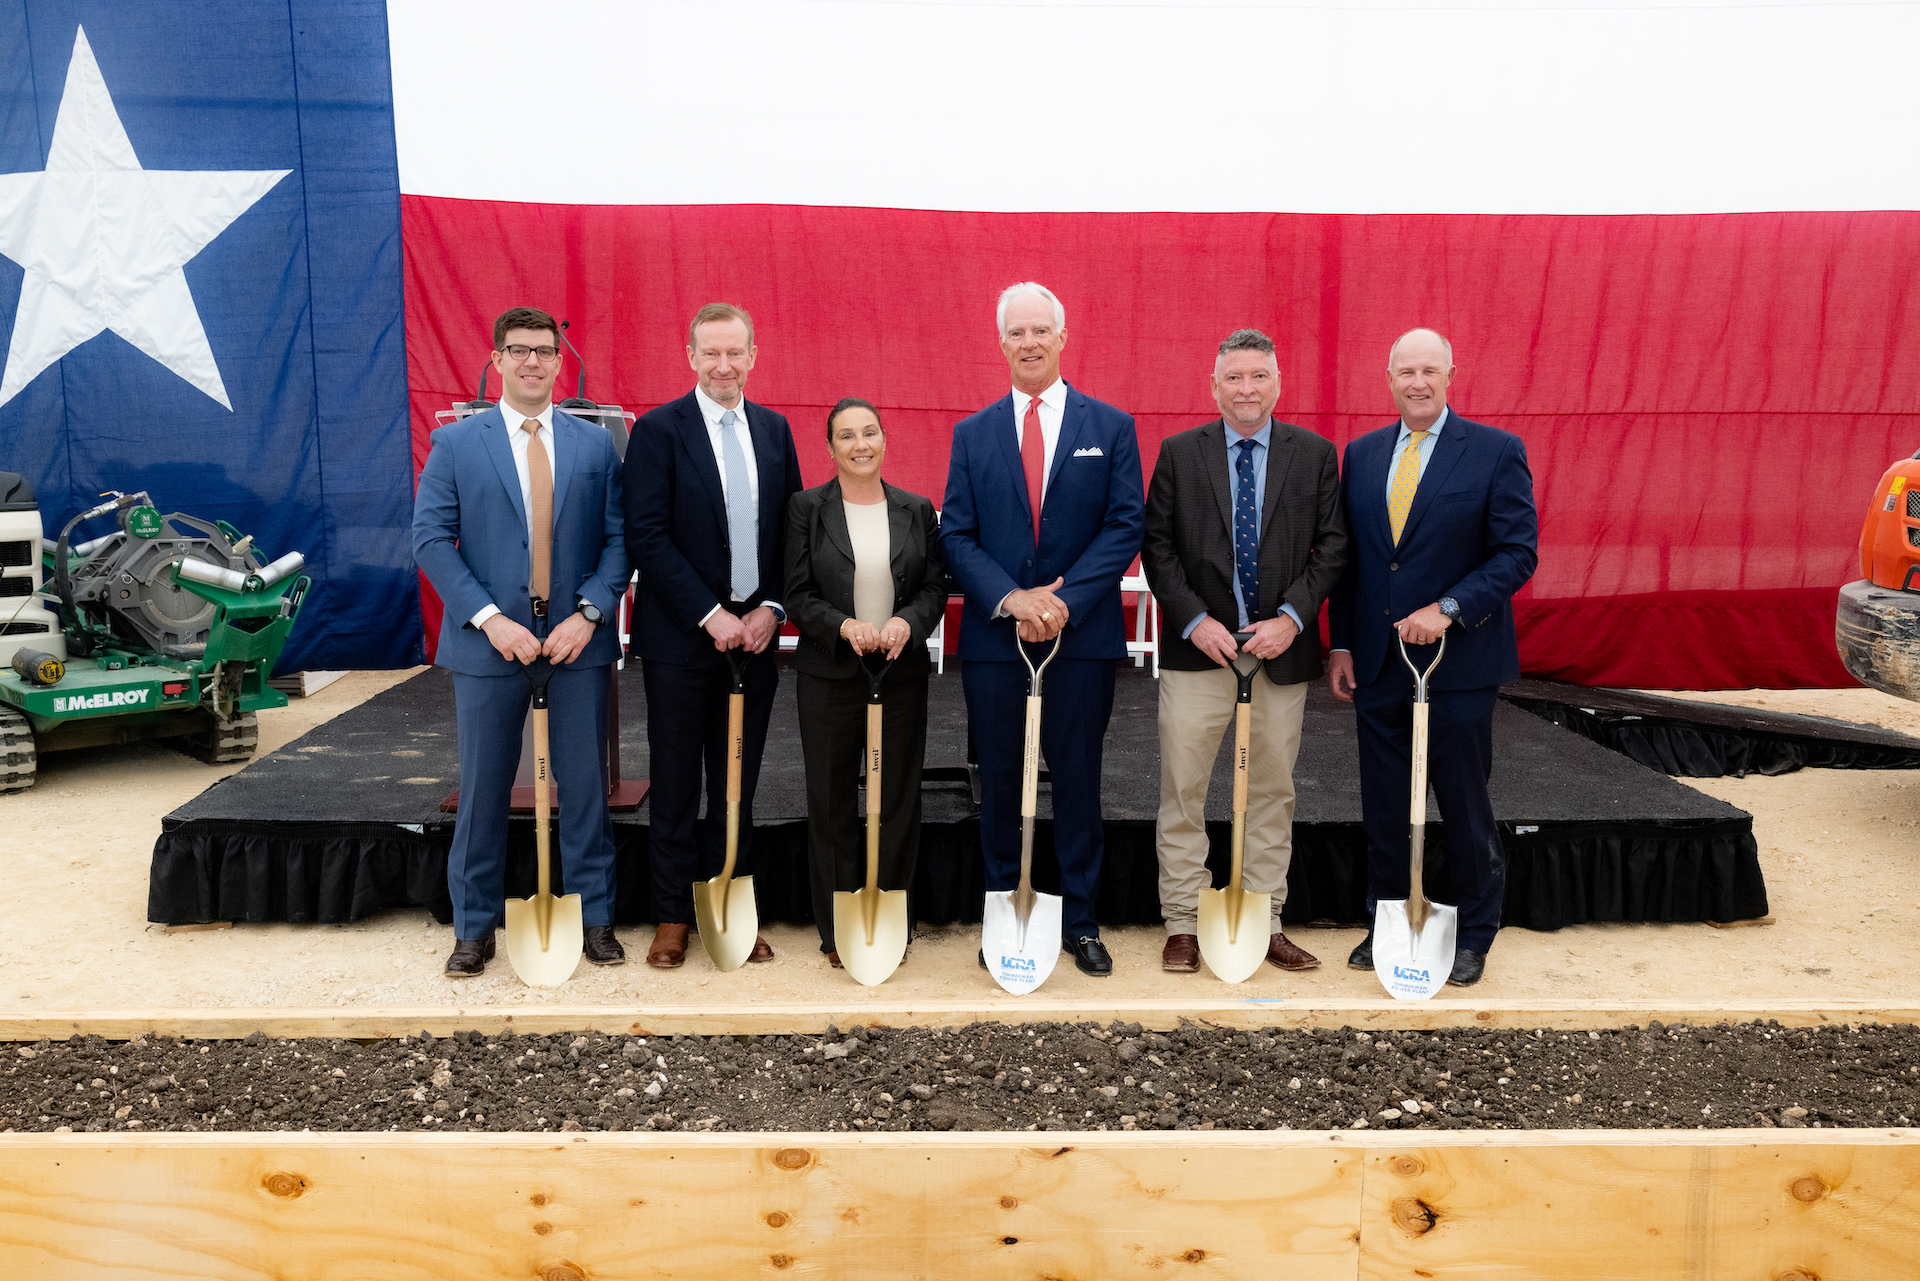 Wartsila joins LCRA officials at a ceremonial groundbreaking Tuesday at the site of a two-unit peaker plant LCRA is building near Maxwell, Texas. Pictured from left, are: Andreas Bucheler, Senior Manager, Strategic Initiatives, Wärtsilä; Risto Paldanius, Vice President, Americas, Wärtsilä; Randa Stephenson, LCRA executive vice president and chief operating officer of Wholesale Power; Tim Timmerman, chair of the LCRA Board of Directors; Andrew Valencia, senior vice president of Generation at LCRA; and Phil Wilson, LCRA general manager. The new Timmerman Power Plant will be able to produce about 380 megawatts of power.